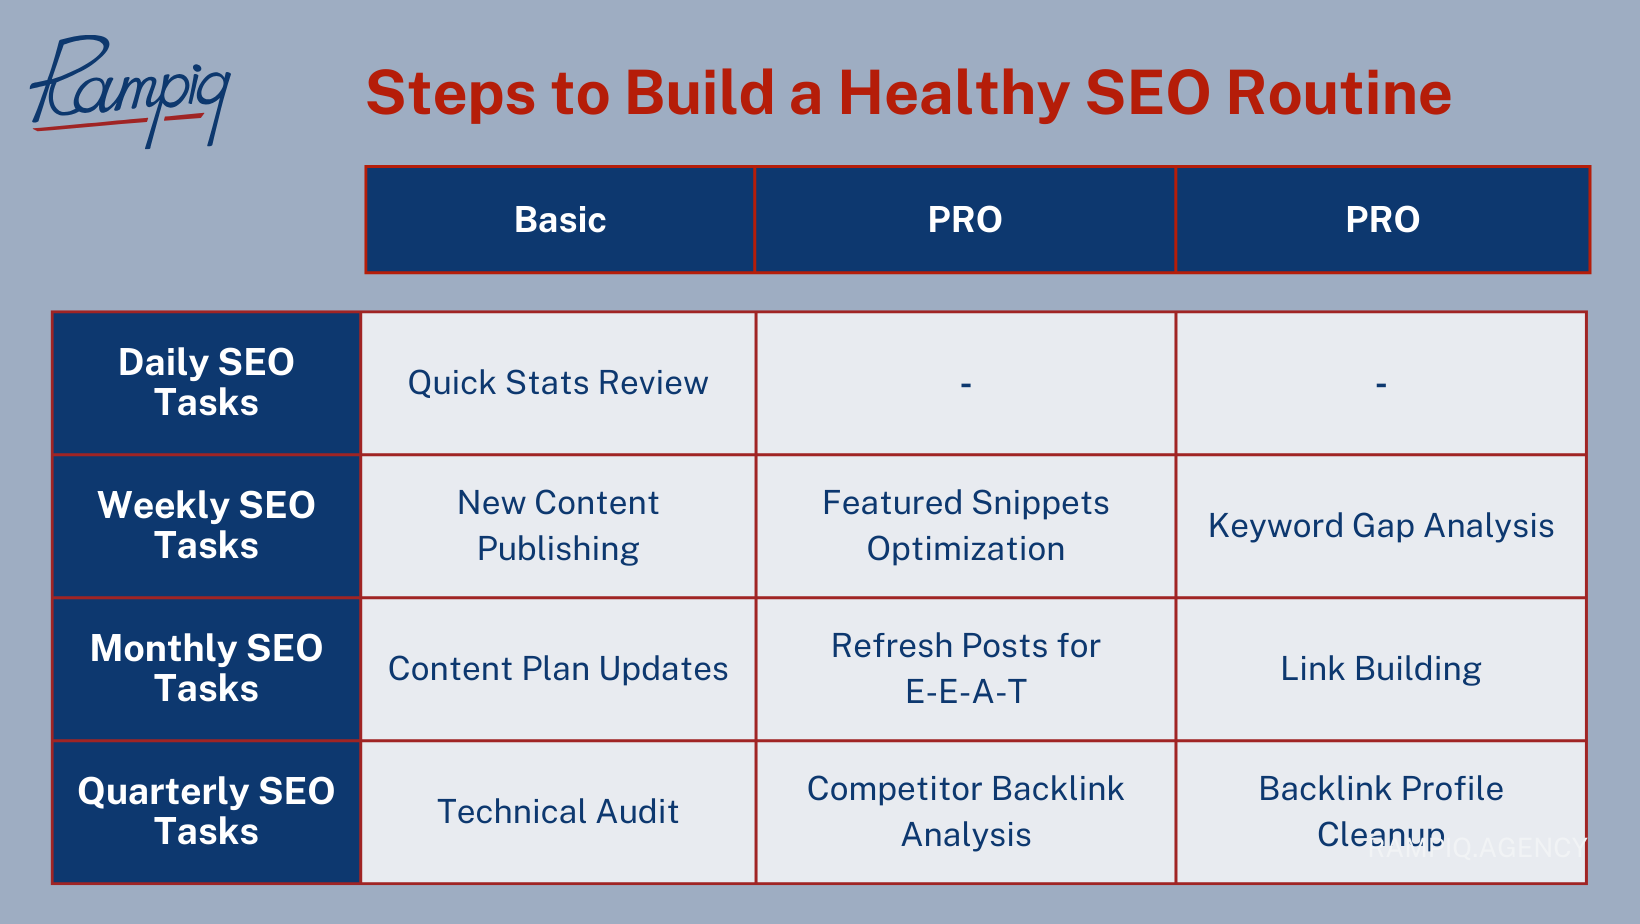 Steps to Build a Healthy SEO Routine